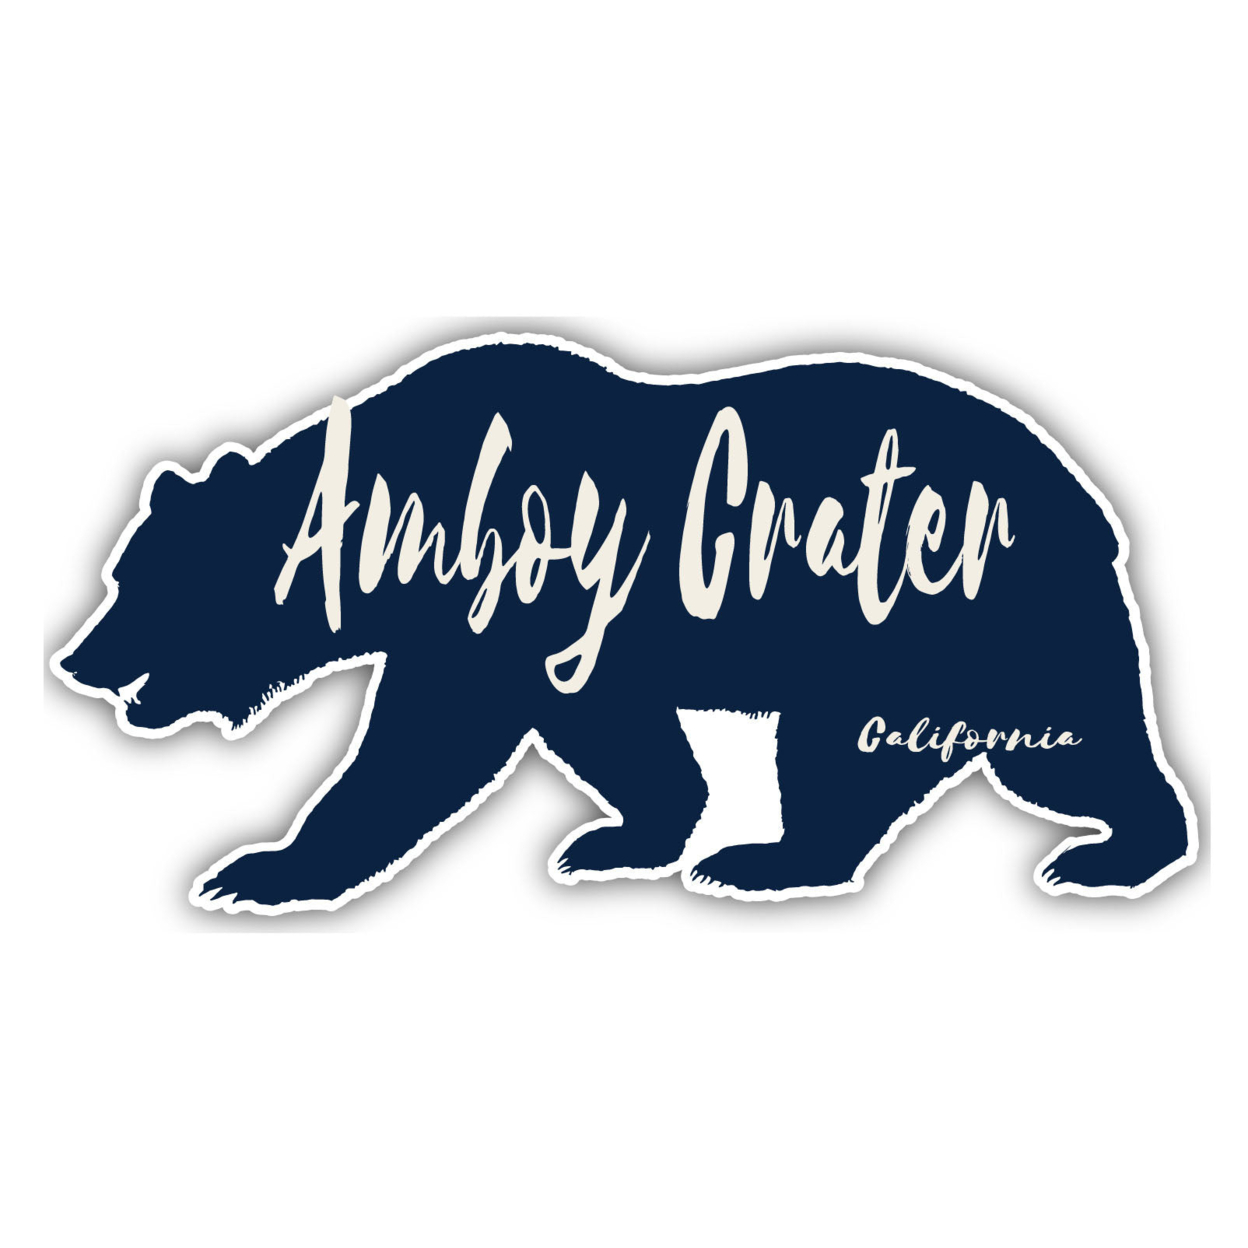 Amboy Crater California Souvenir Decorative Stickers (Choose Theme And Size) - 4-Pack, 8-Inch, Bear